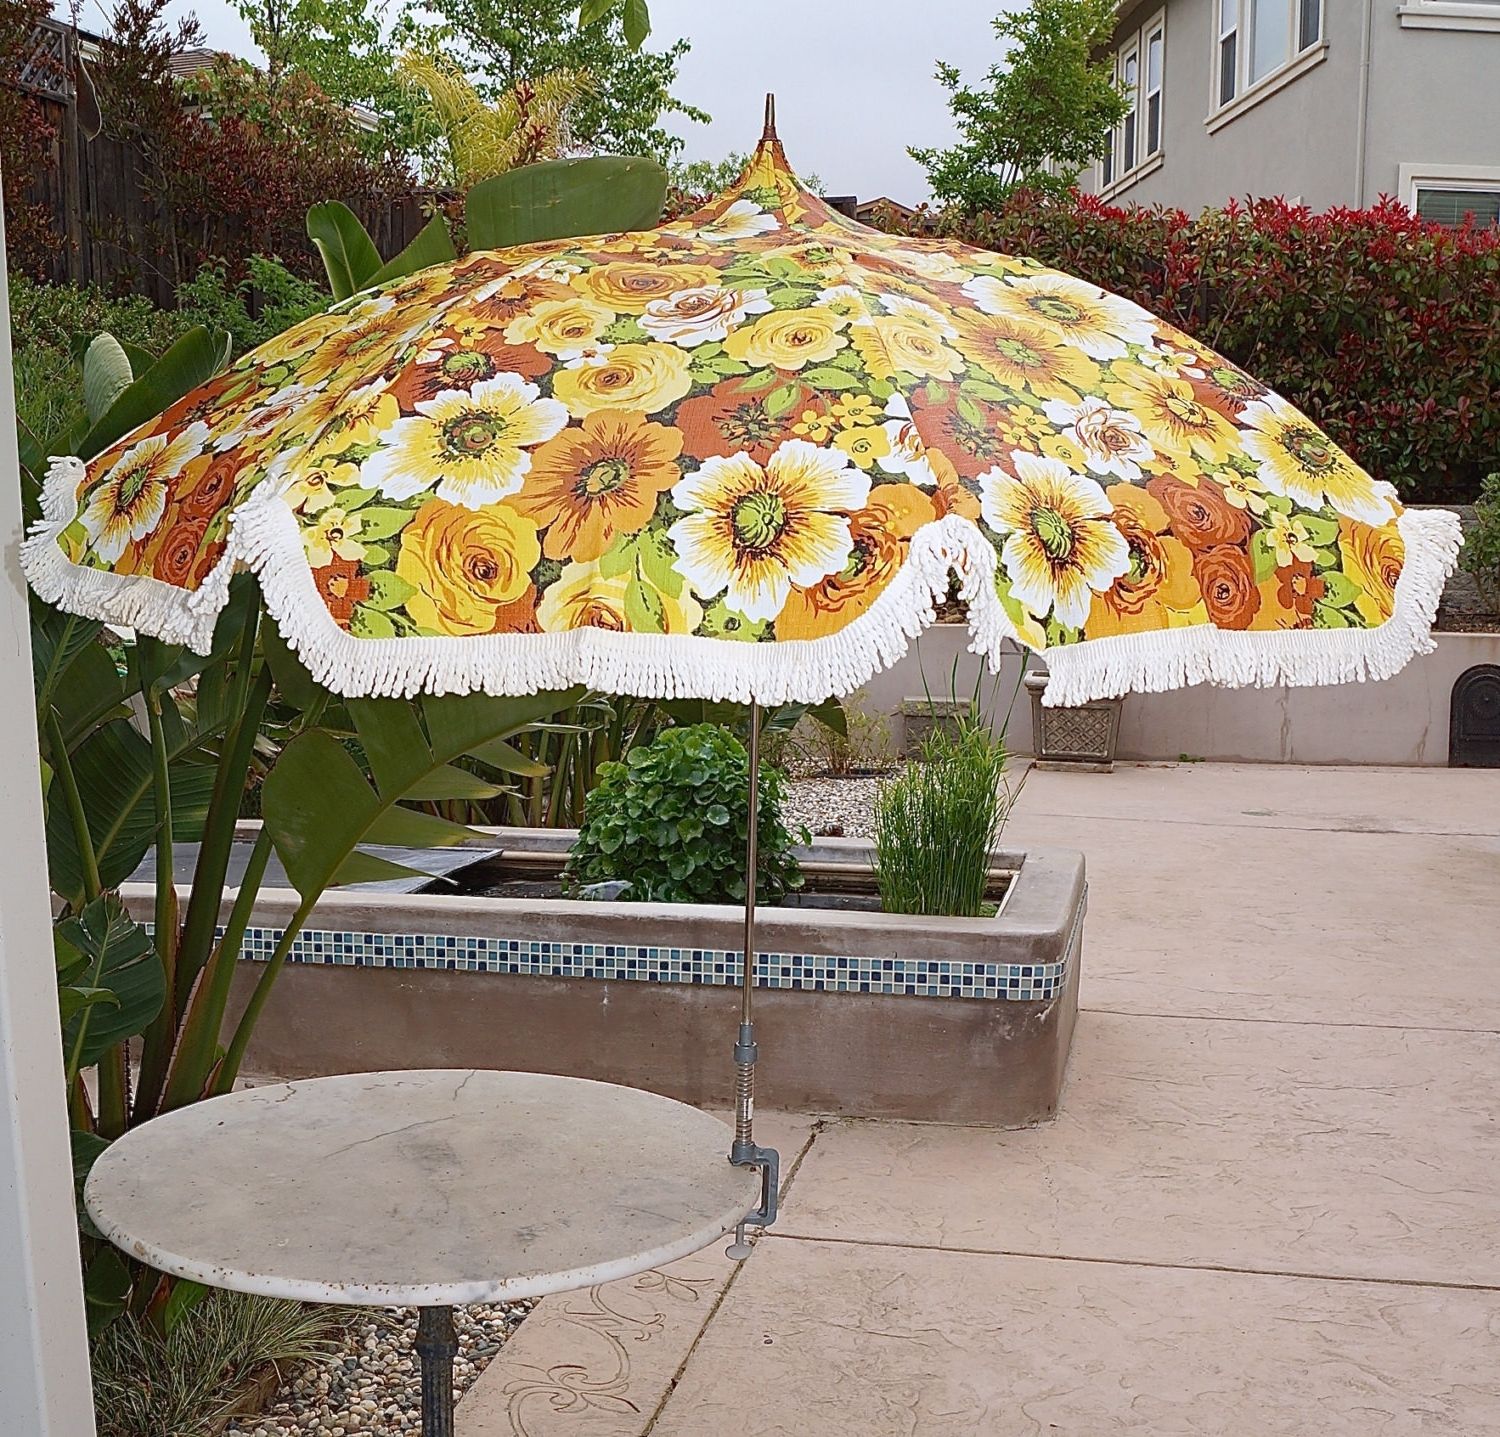 Most Recently Released 44 Patio Umbrella With Fringe Hm5k – Mcnamaralaw Intended For Patio Umbrellas With Fringe (View 3 of 20)